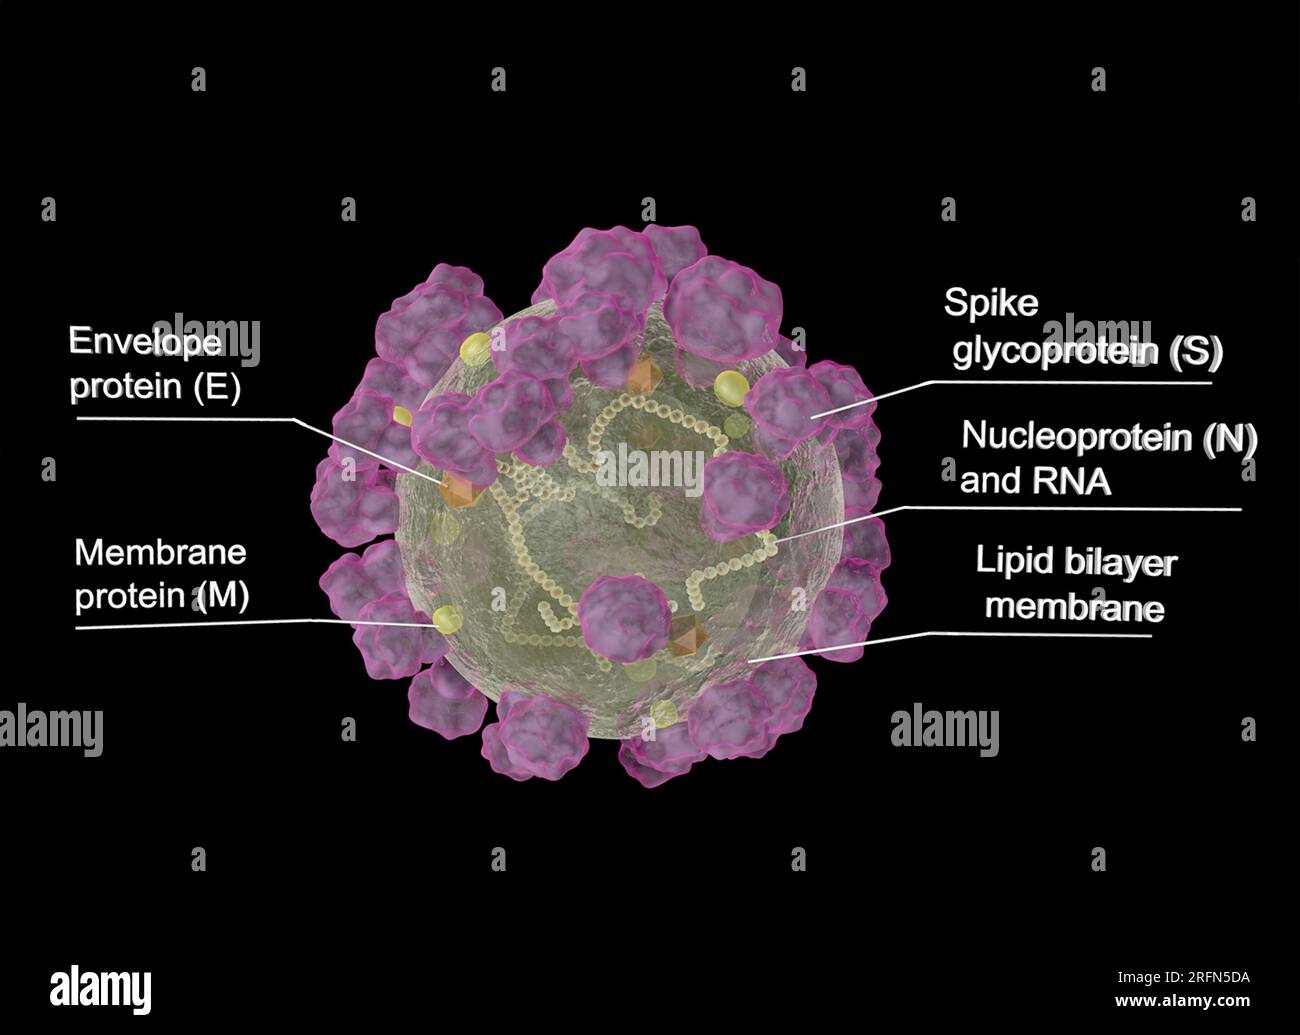 Coronavirus disease (COVID-19) is an infectious disease caused by the SARS-CoV-2 virus.  The SARS-CoV-2 virus consists of four different proteins and a strand of RNA.  The “Spike” protein (S) sticks out from the membrane, giving the virus its distinctive 'corona' appearance. Two other proteins, envelope protein (E) and membrane protein (M), occur throughout the membrane to provide structural integrity. Finally, Inside the virus, nucleoprotein (N) acts as a scaffolding for the 29,900 nucleotides of RNA that make up the viral genome. Stock Photo